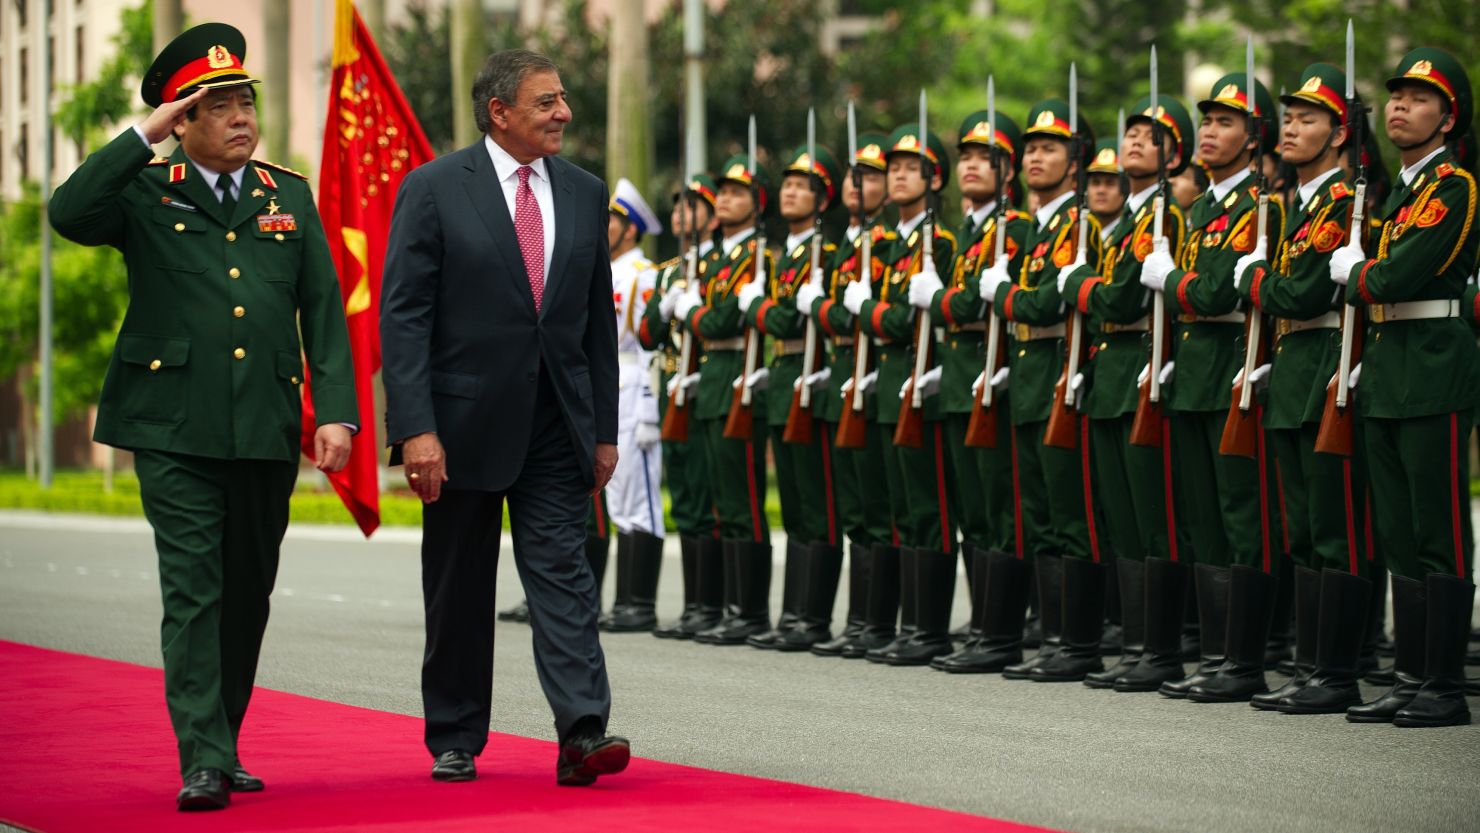 U.S. Defense Secretary Leon Panetta joins Vietnamese Defense Minister Phung Quang Thanh at a ceremony Monday in Hanoi.